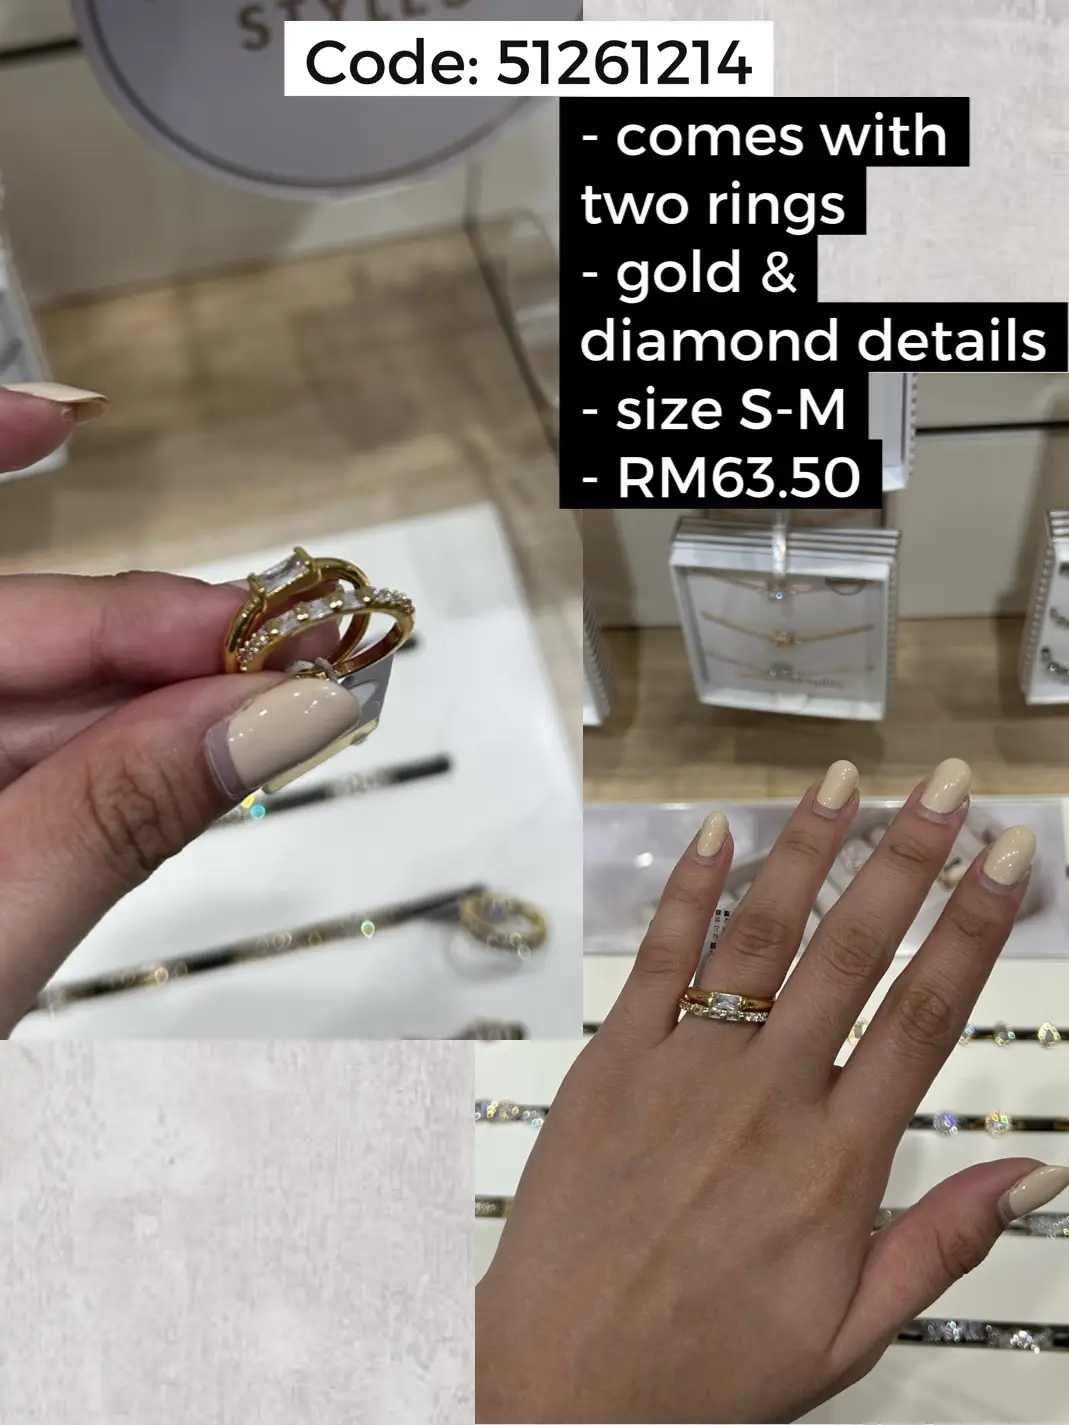 Lovisa - This whole ring collection is a ✨ vibe ✨ Have you seen